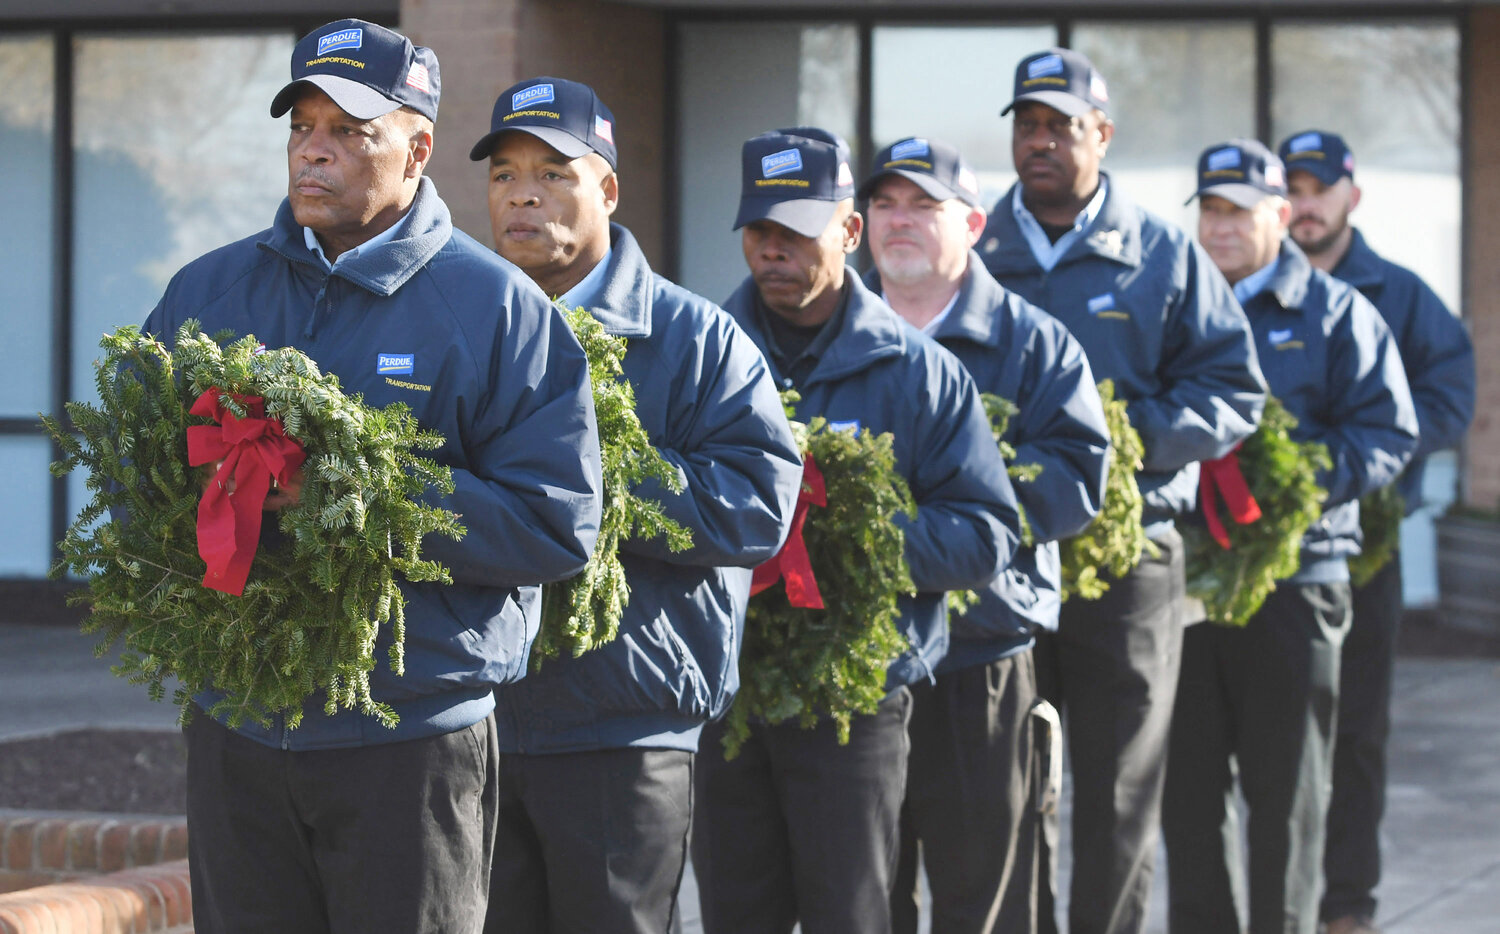 Perdue Farms’ professional truck drivers will conduct a public wreath-laying ceremony Thursday, Dec. 14, at the Wicomico War Veterans Memorial in Salisbury as part of the company’s annual participation in the Wreaths Across America’s tradition of recognizing fallen heroes during the holiday season. The public is invited to attend the 10 a.m. event.